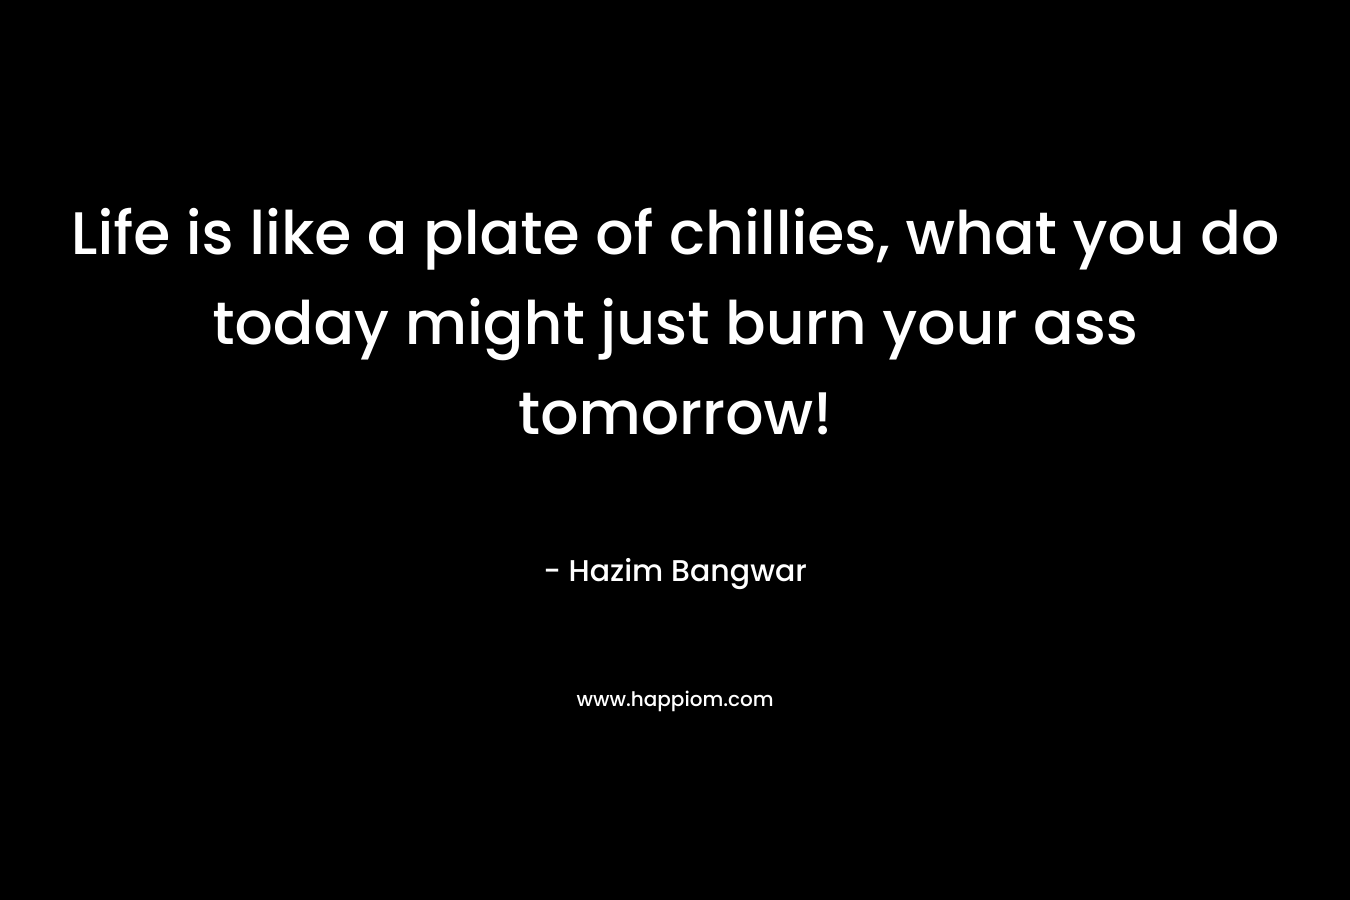 Life is like a plate of chillies, what you do today might just burn your ass tomorrow!